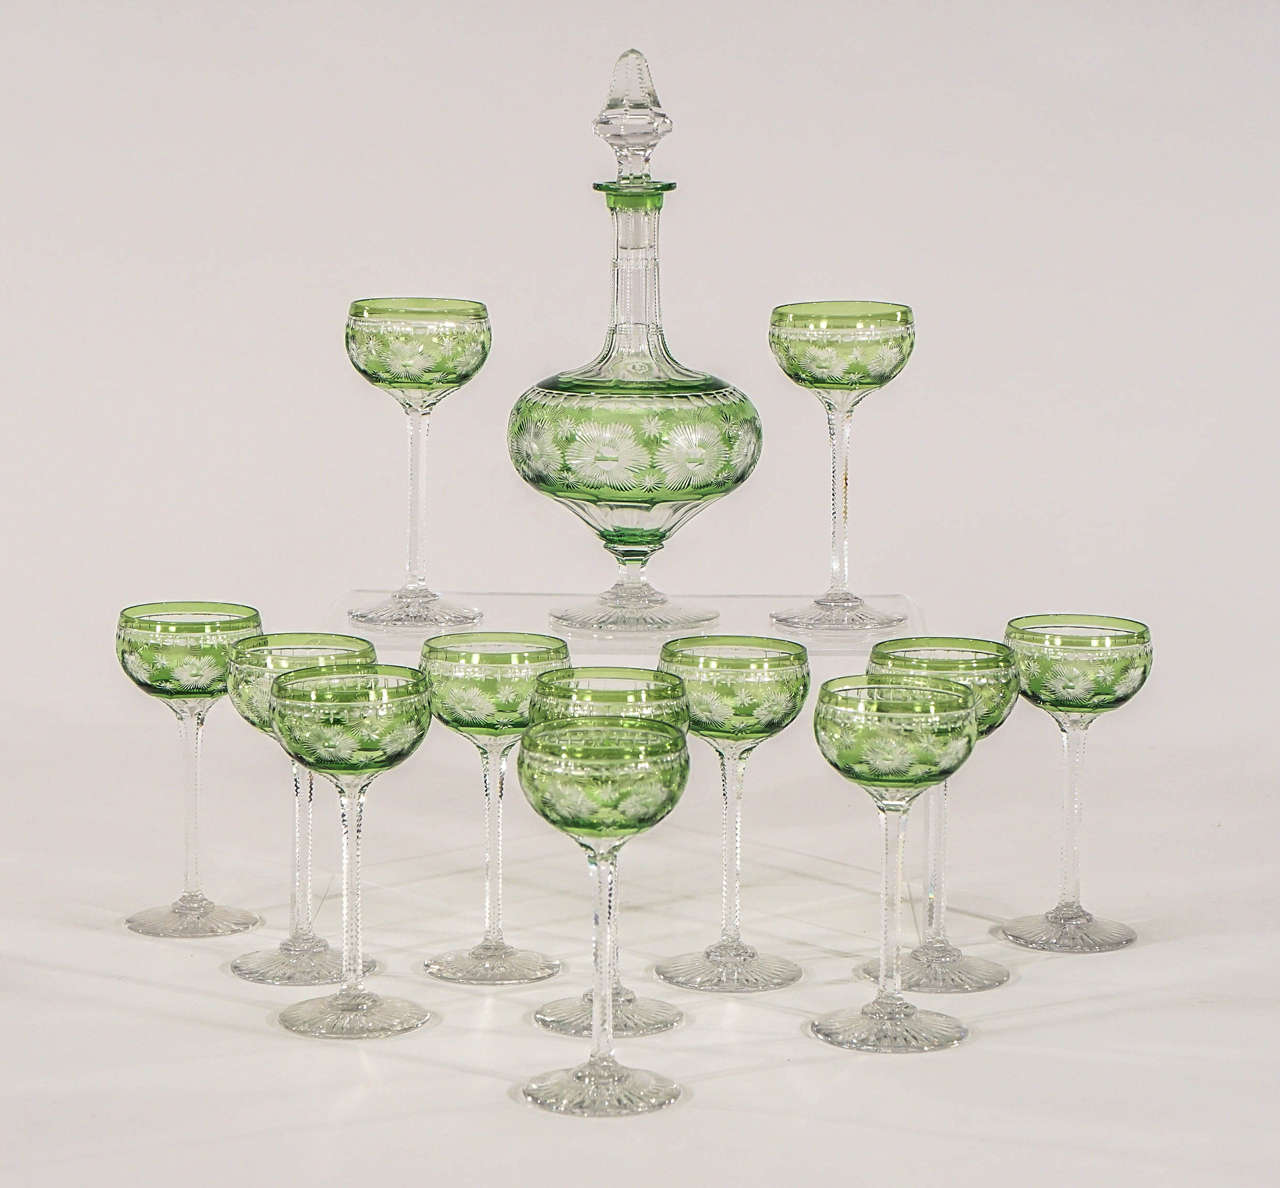 This is a perfect set of 12 handblown crystal cordials cut to clear in an Art Deco inspired floral pattern made by Webb, England. The base is cut with a radiating star pattern and an elegant zipper cut stem. Standing 5 1/4" tall, these are a